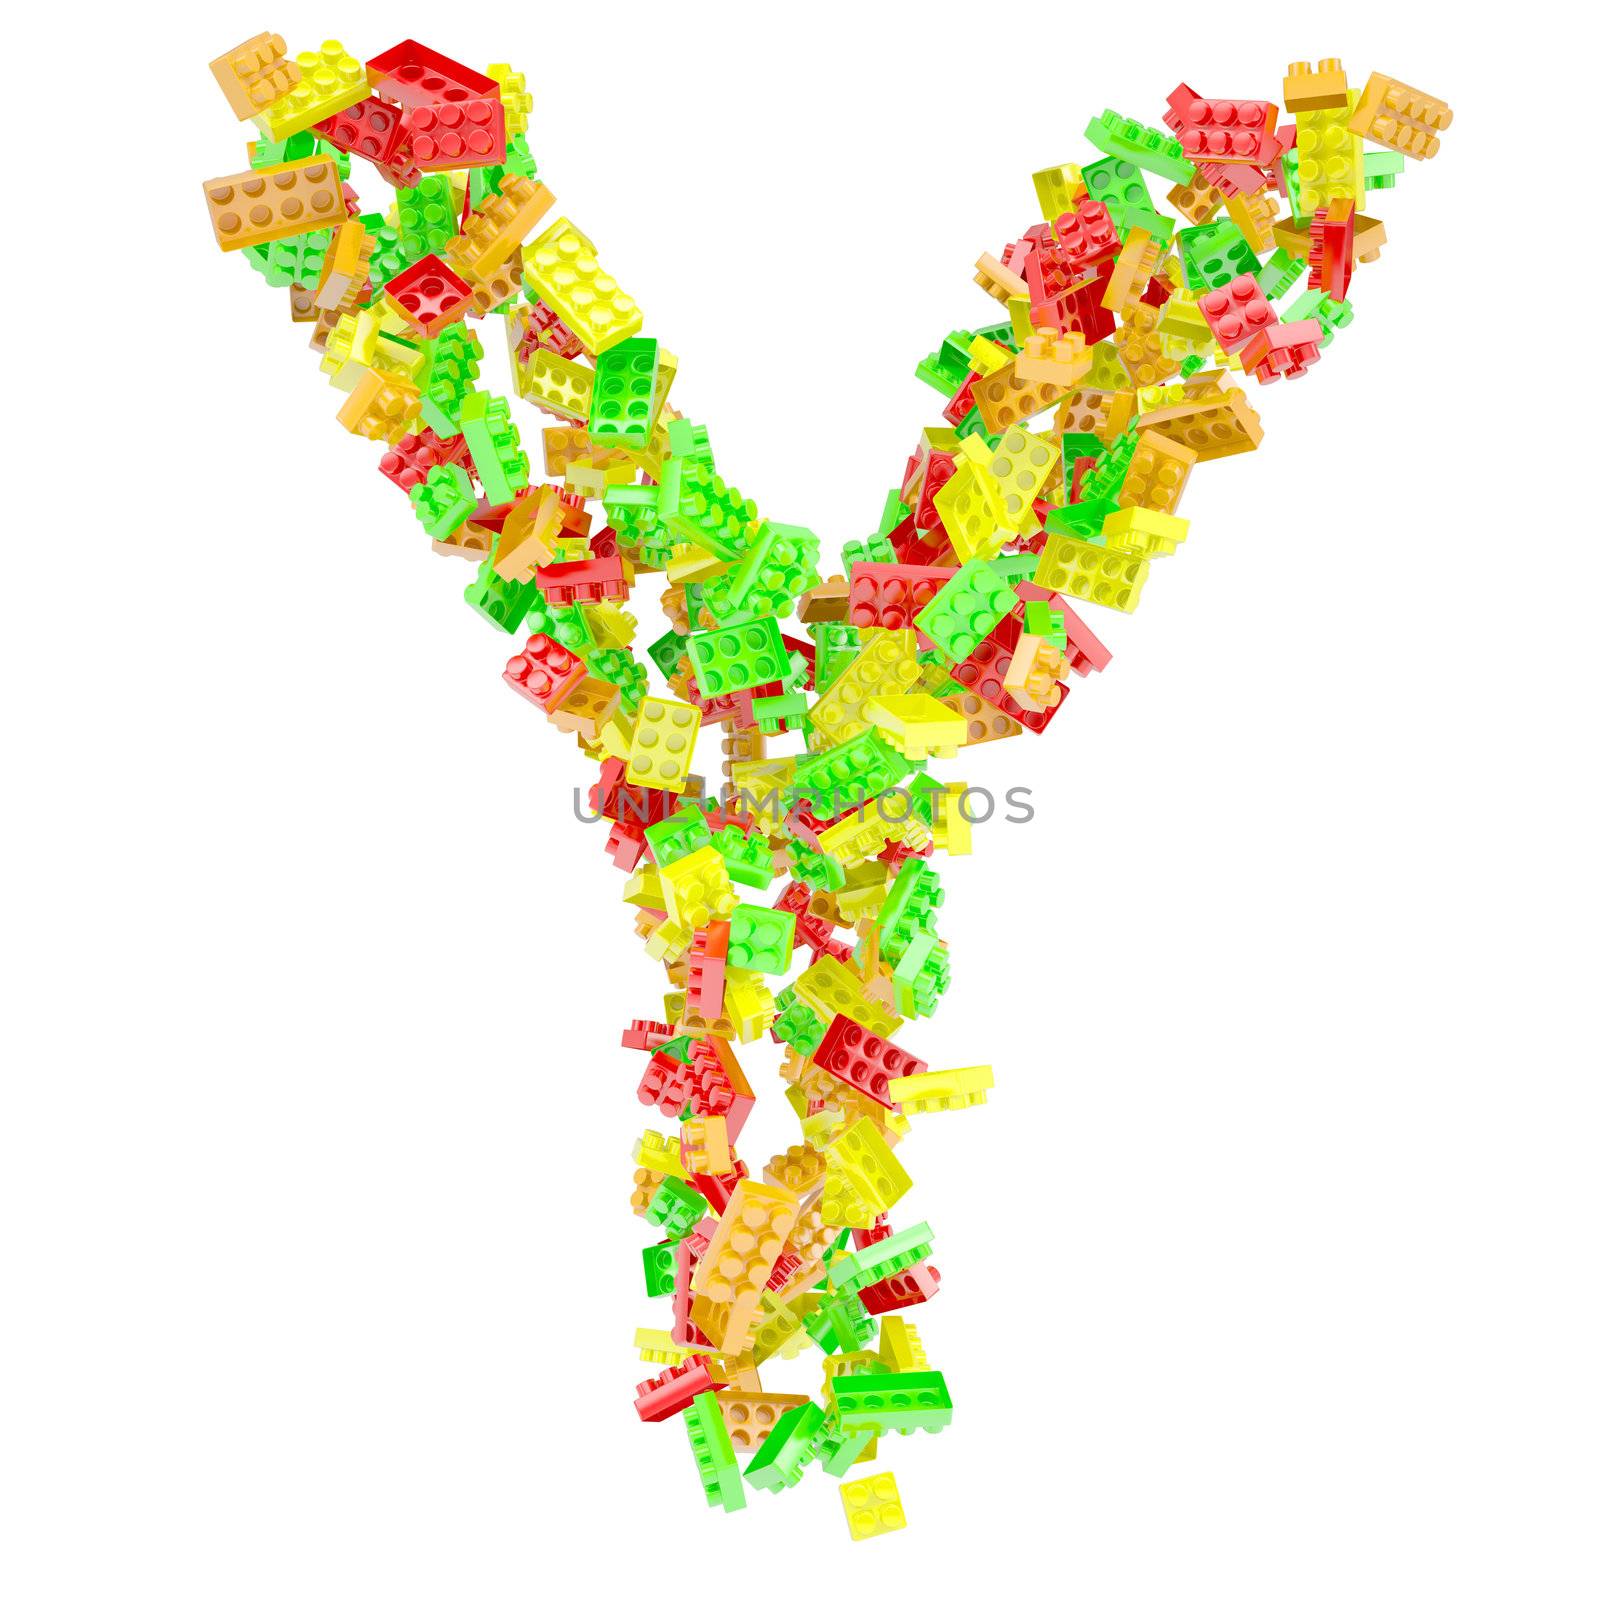 The letter Y is made up of children's blocks by cherezoff